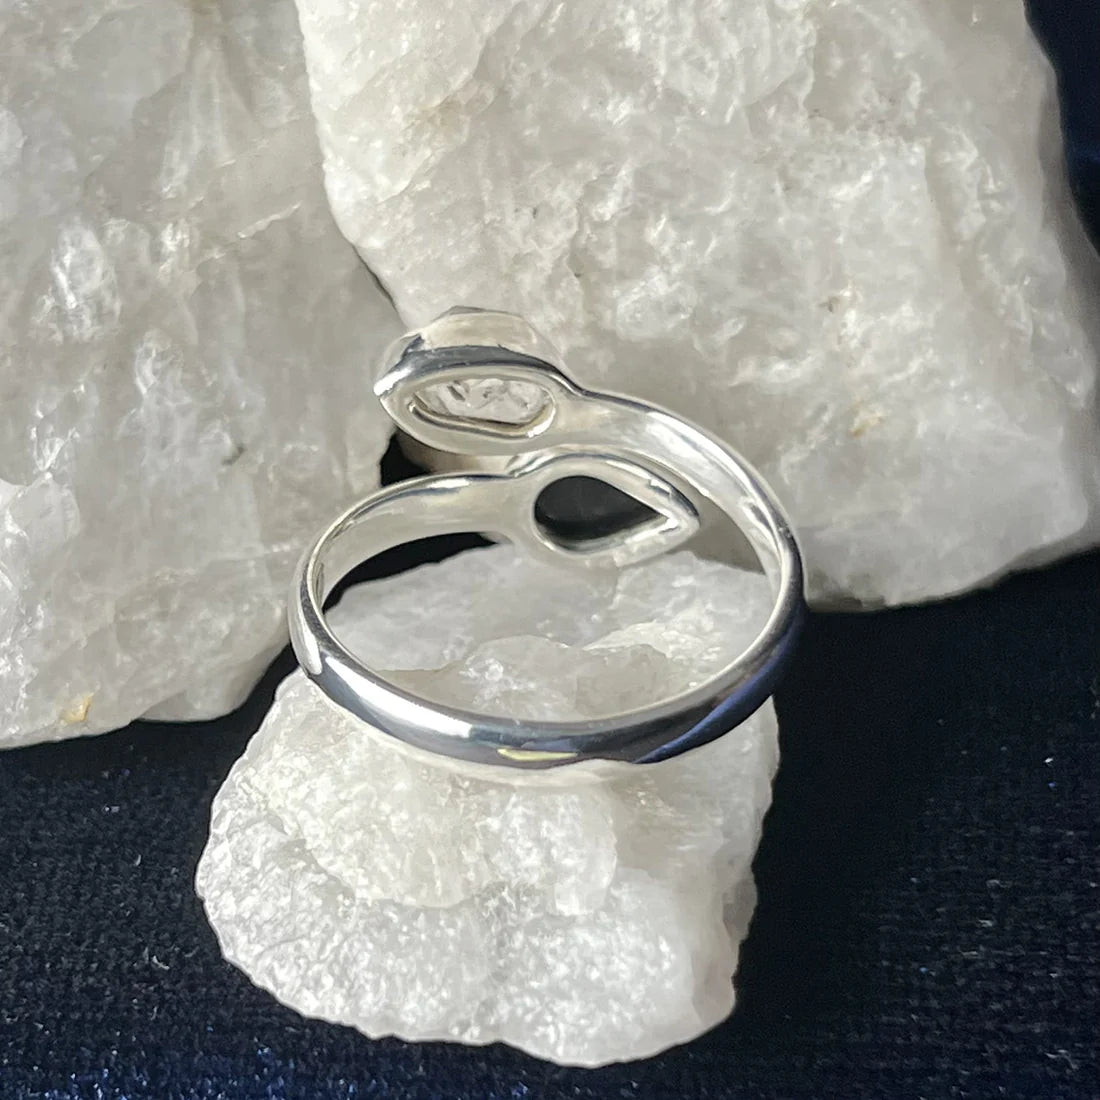 Black Onyx with Herkimer Diamond Sterling Silver Ring